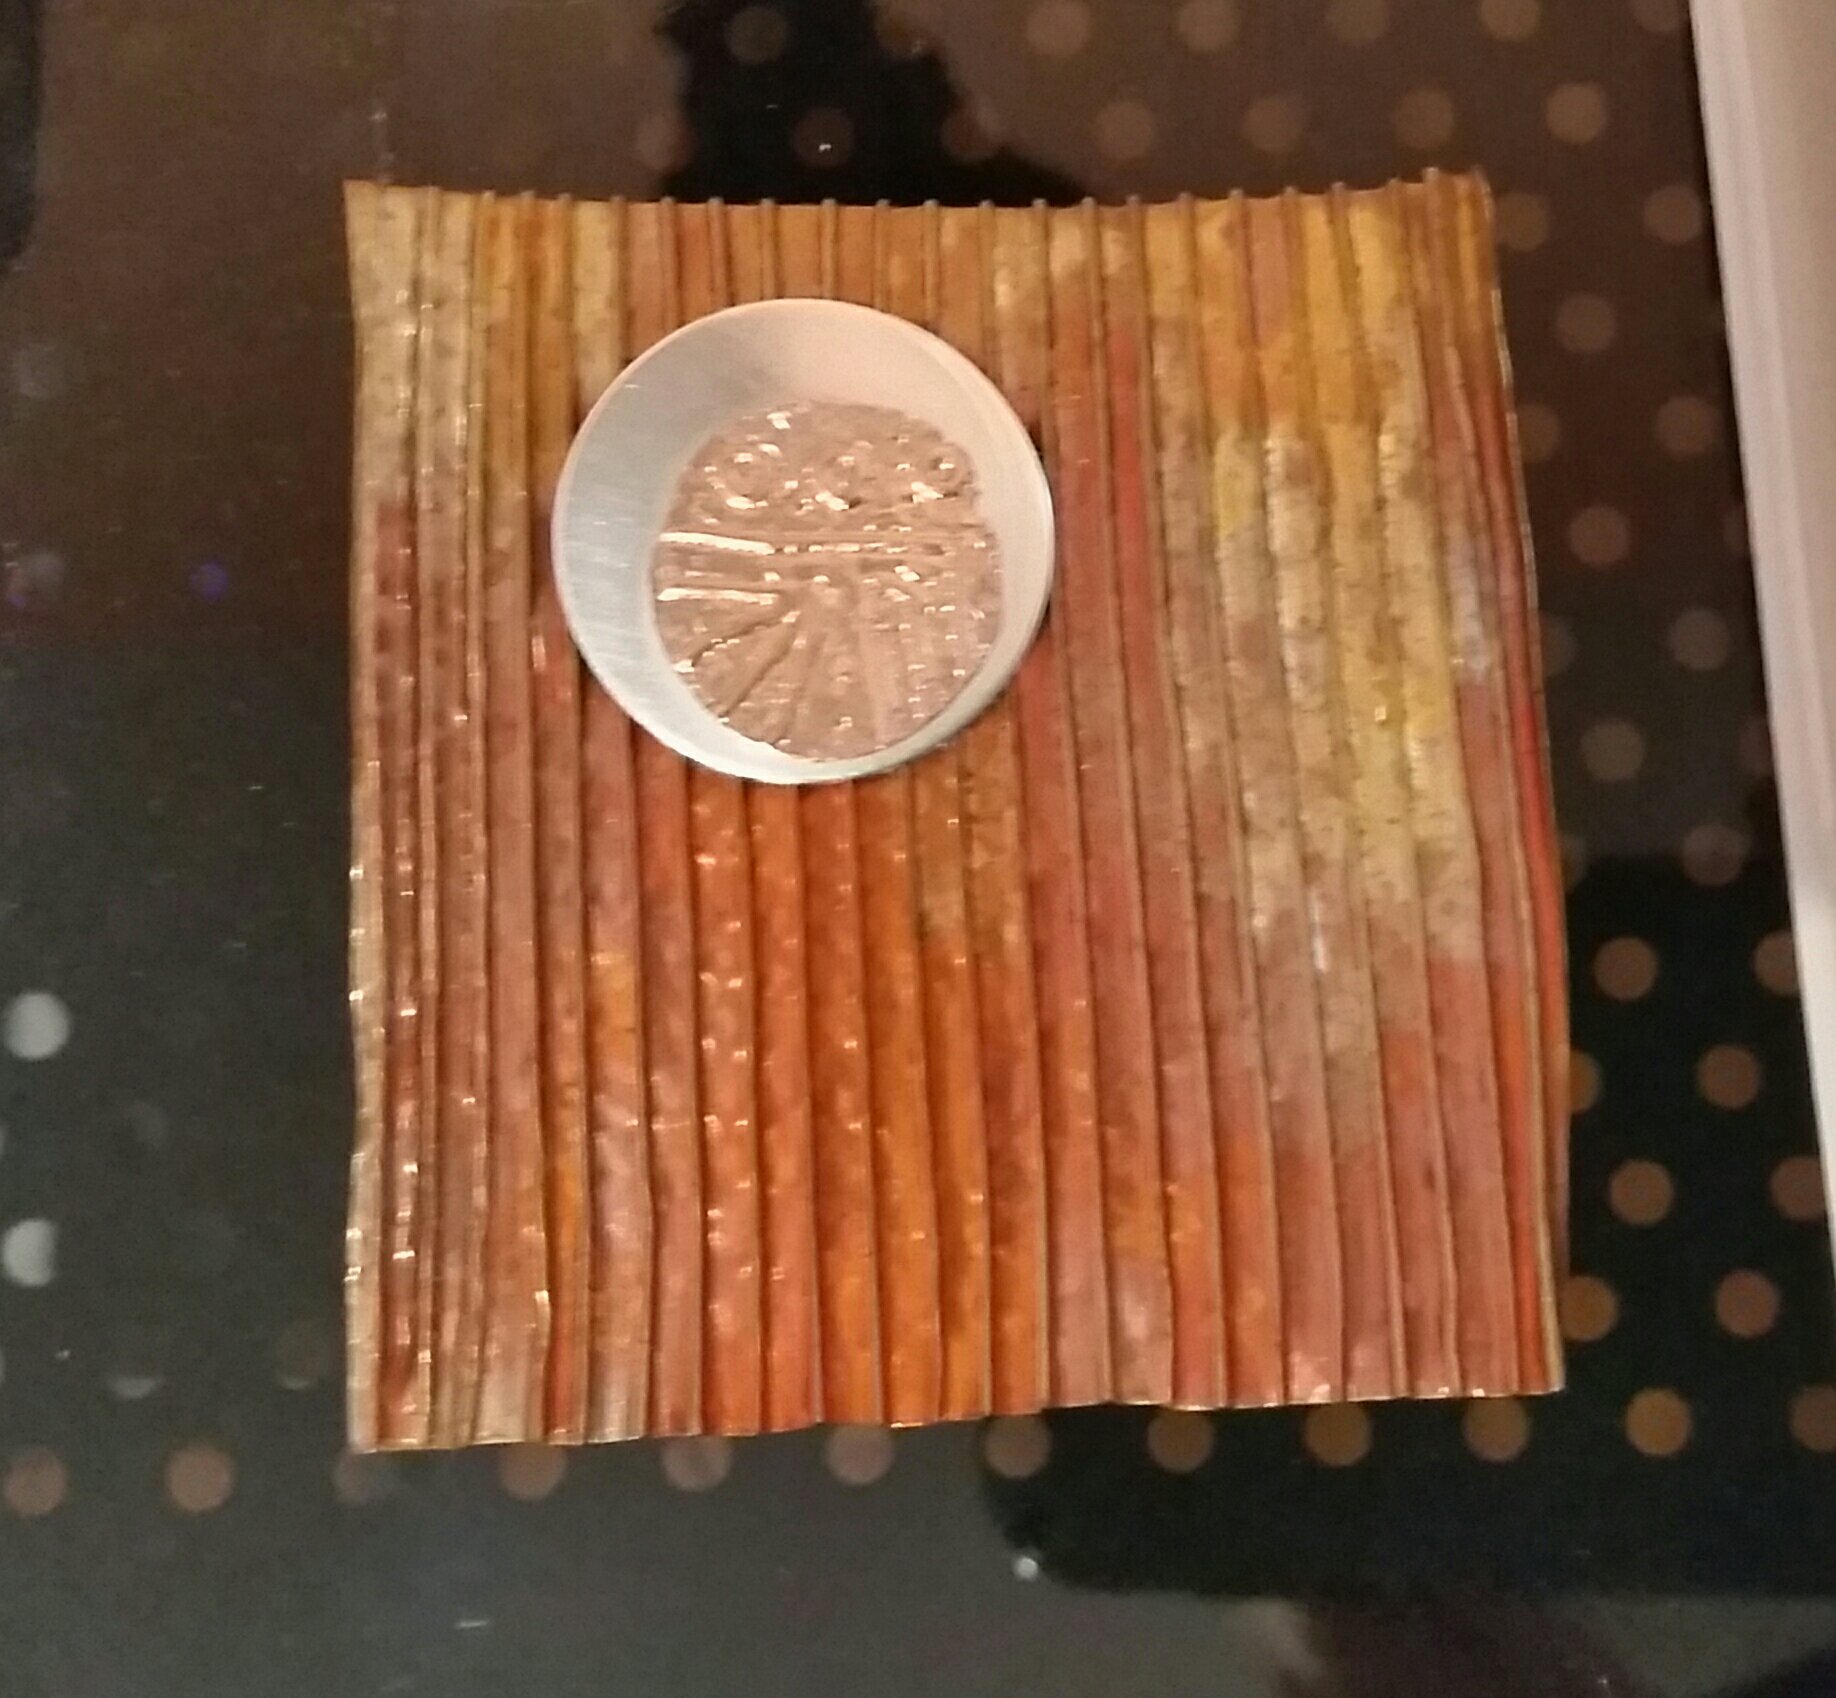 Sweat-soldered disks on a copper background